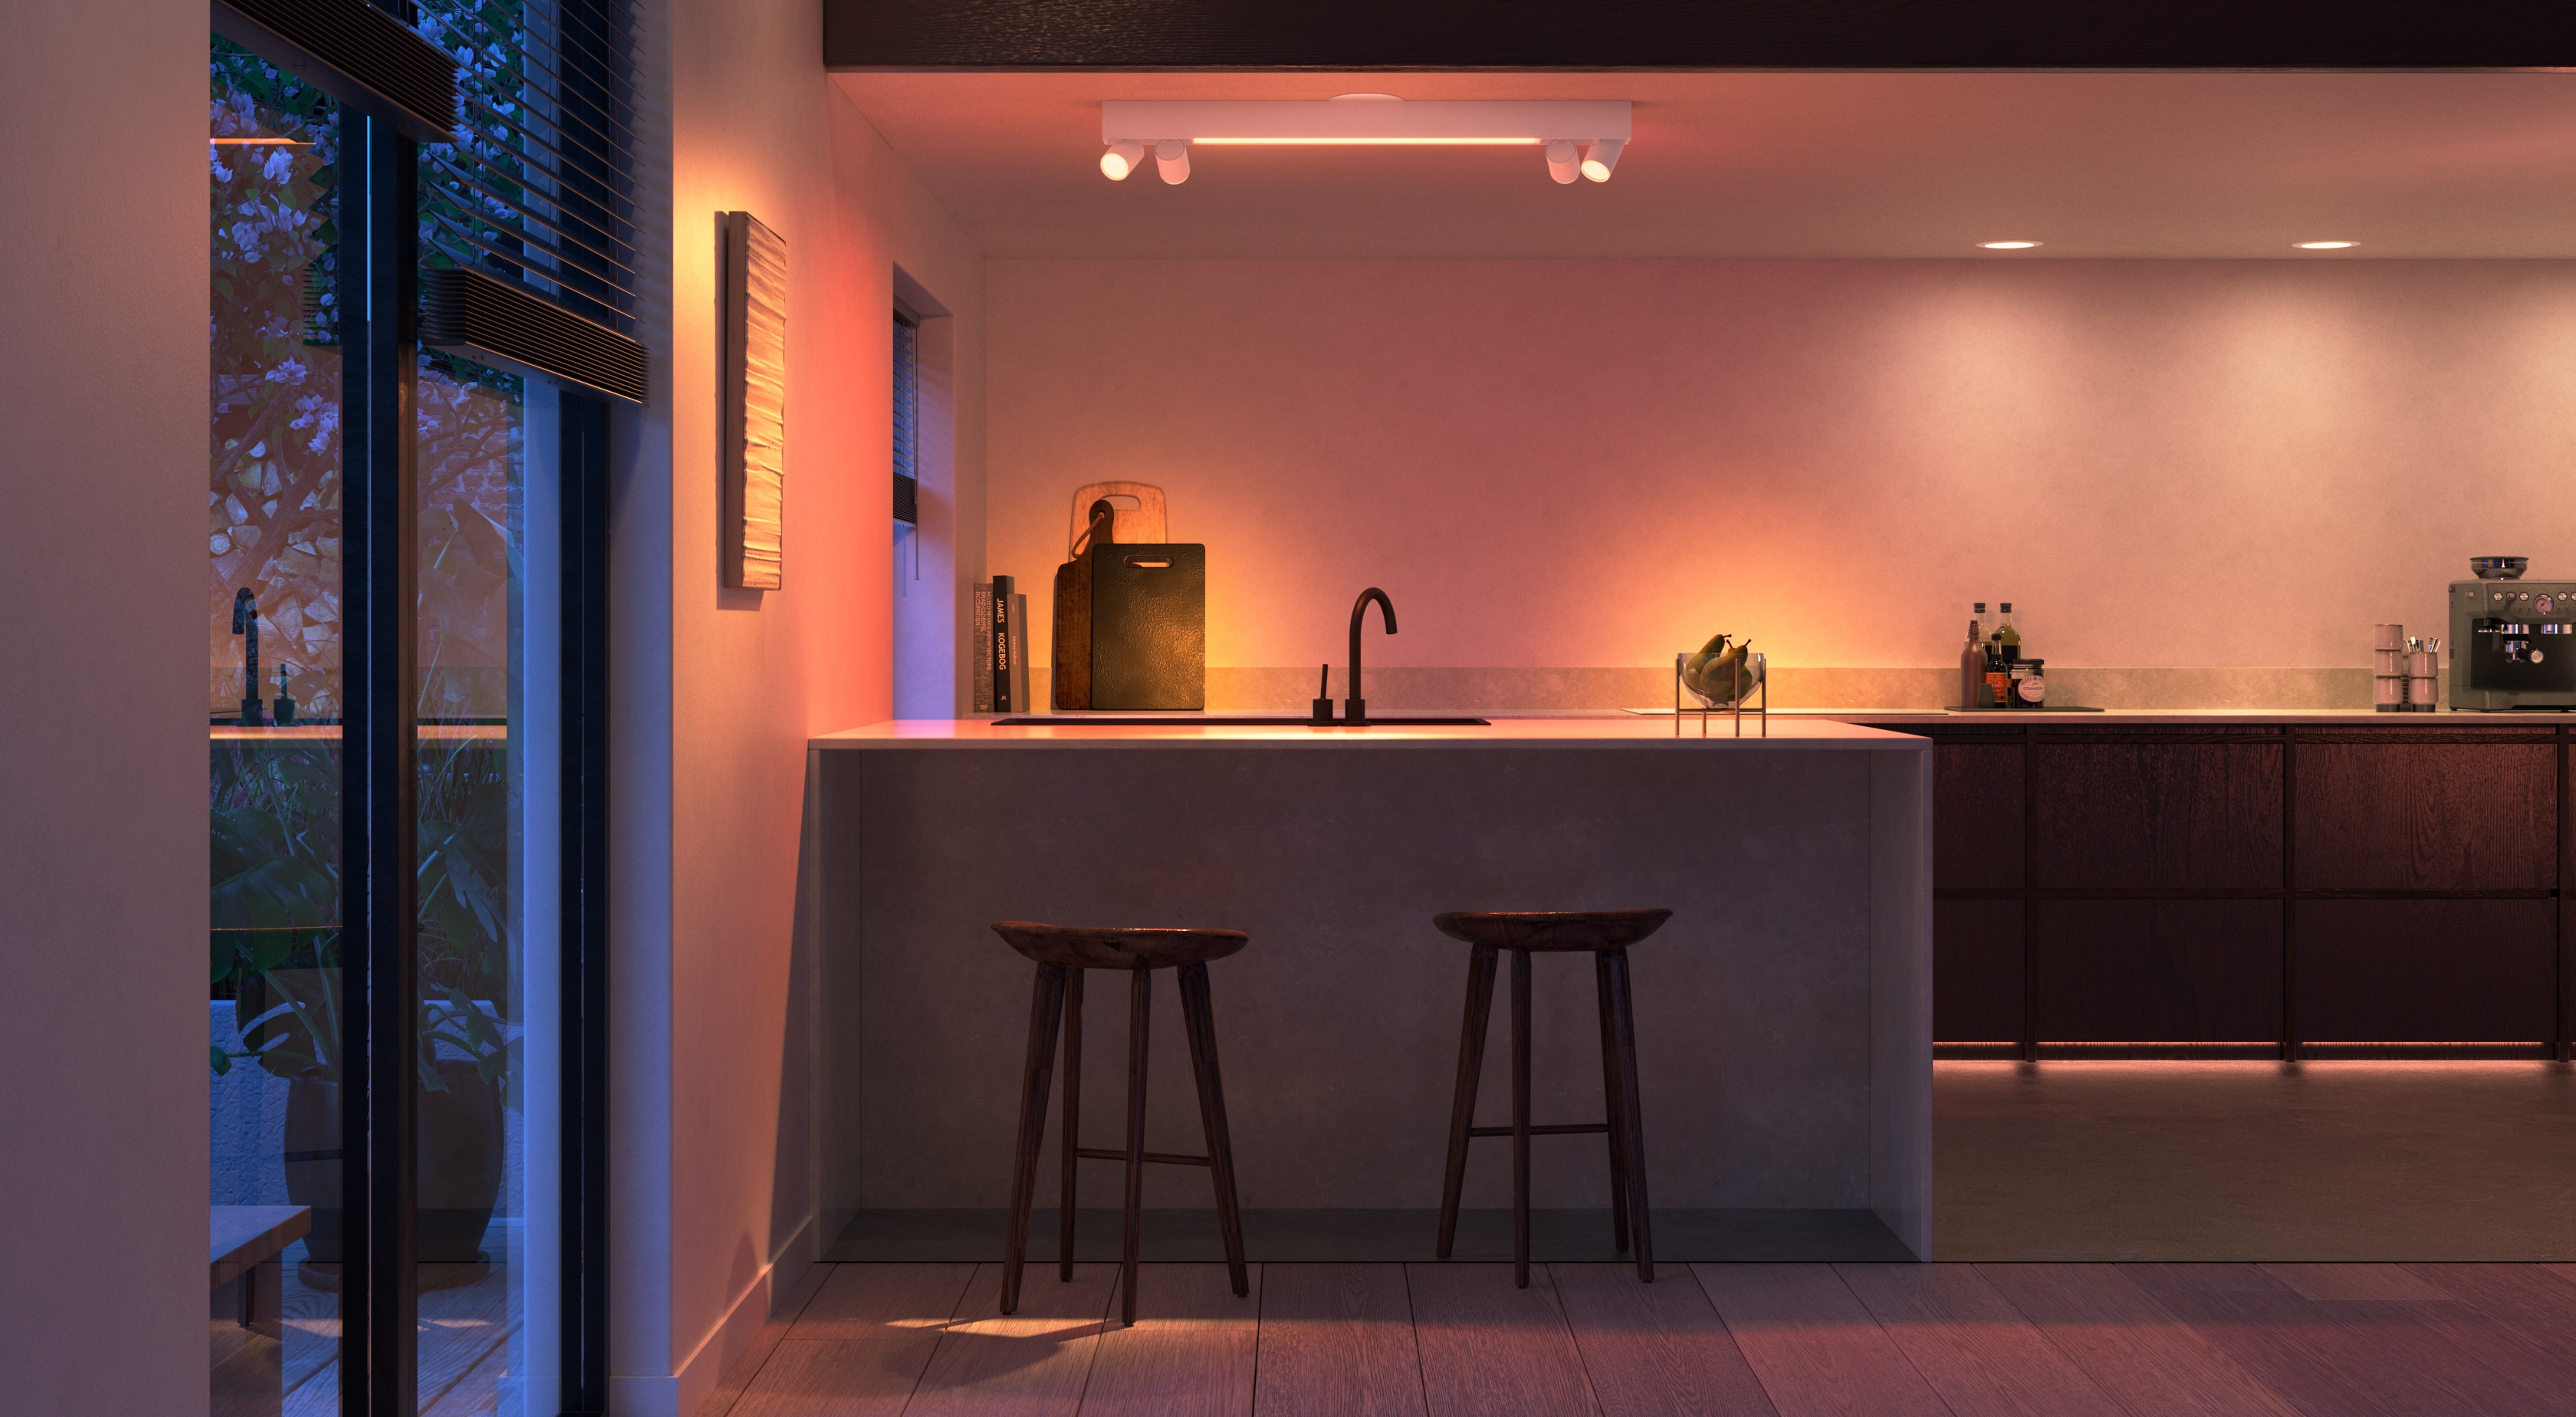 Philips Hue launches products to help secure your home